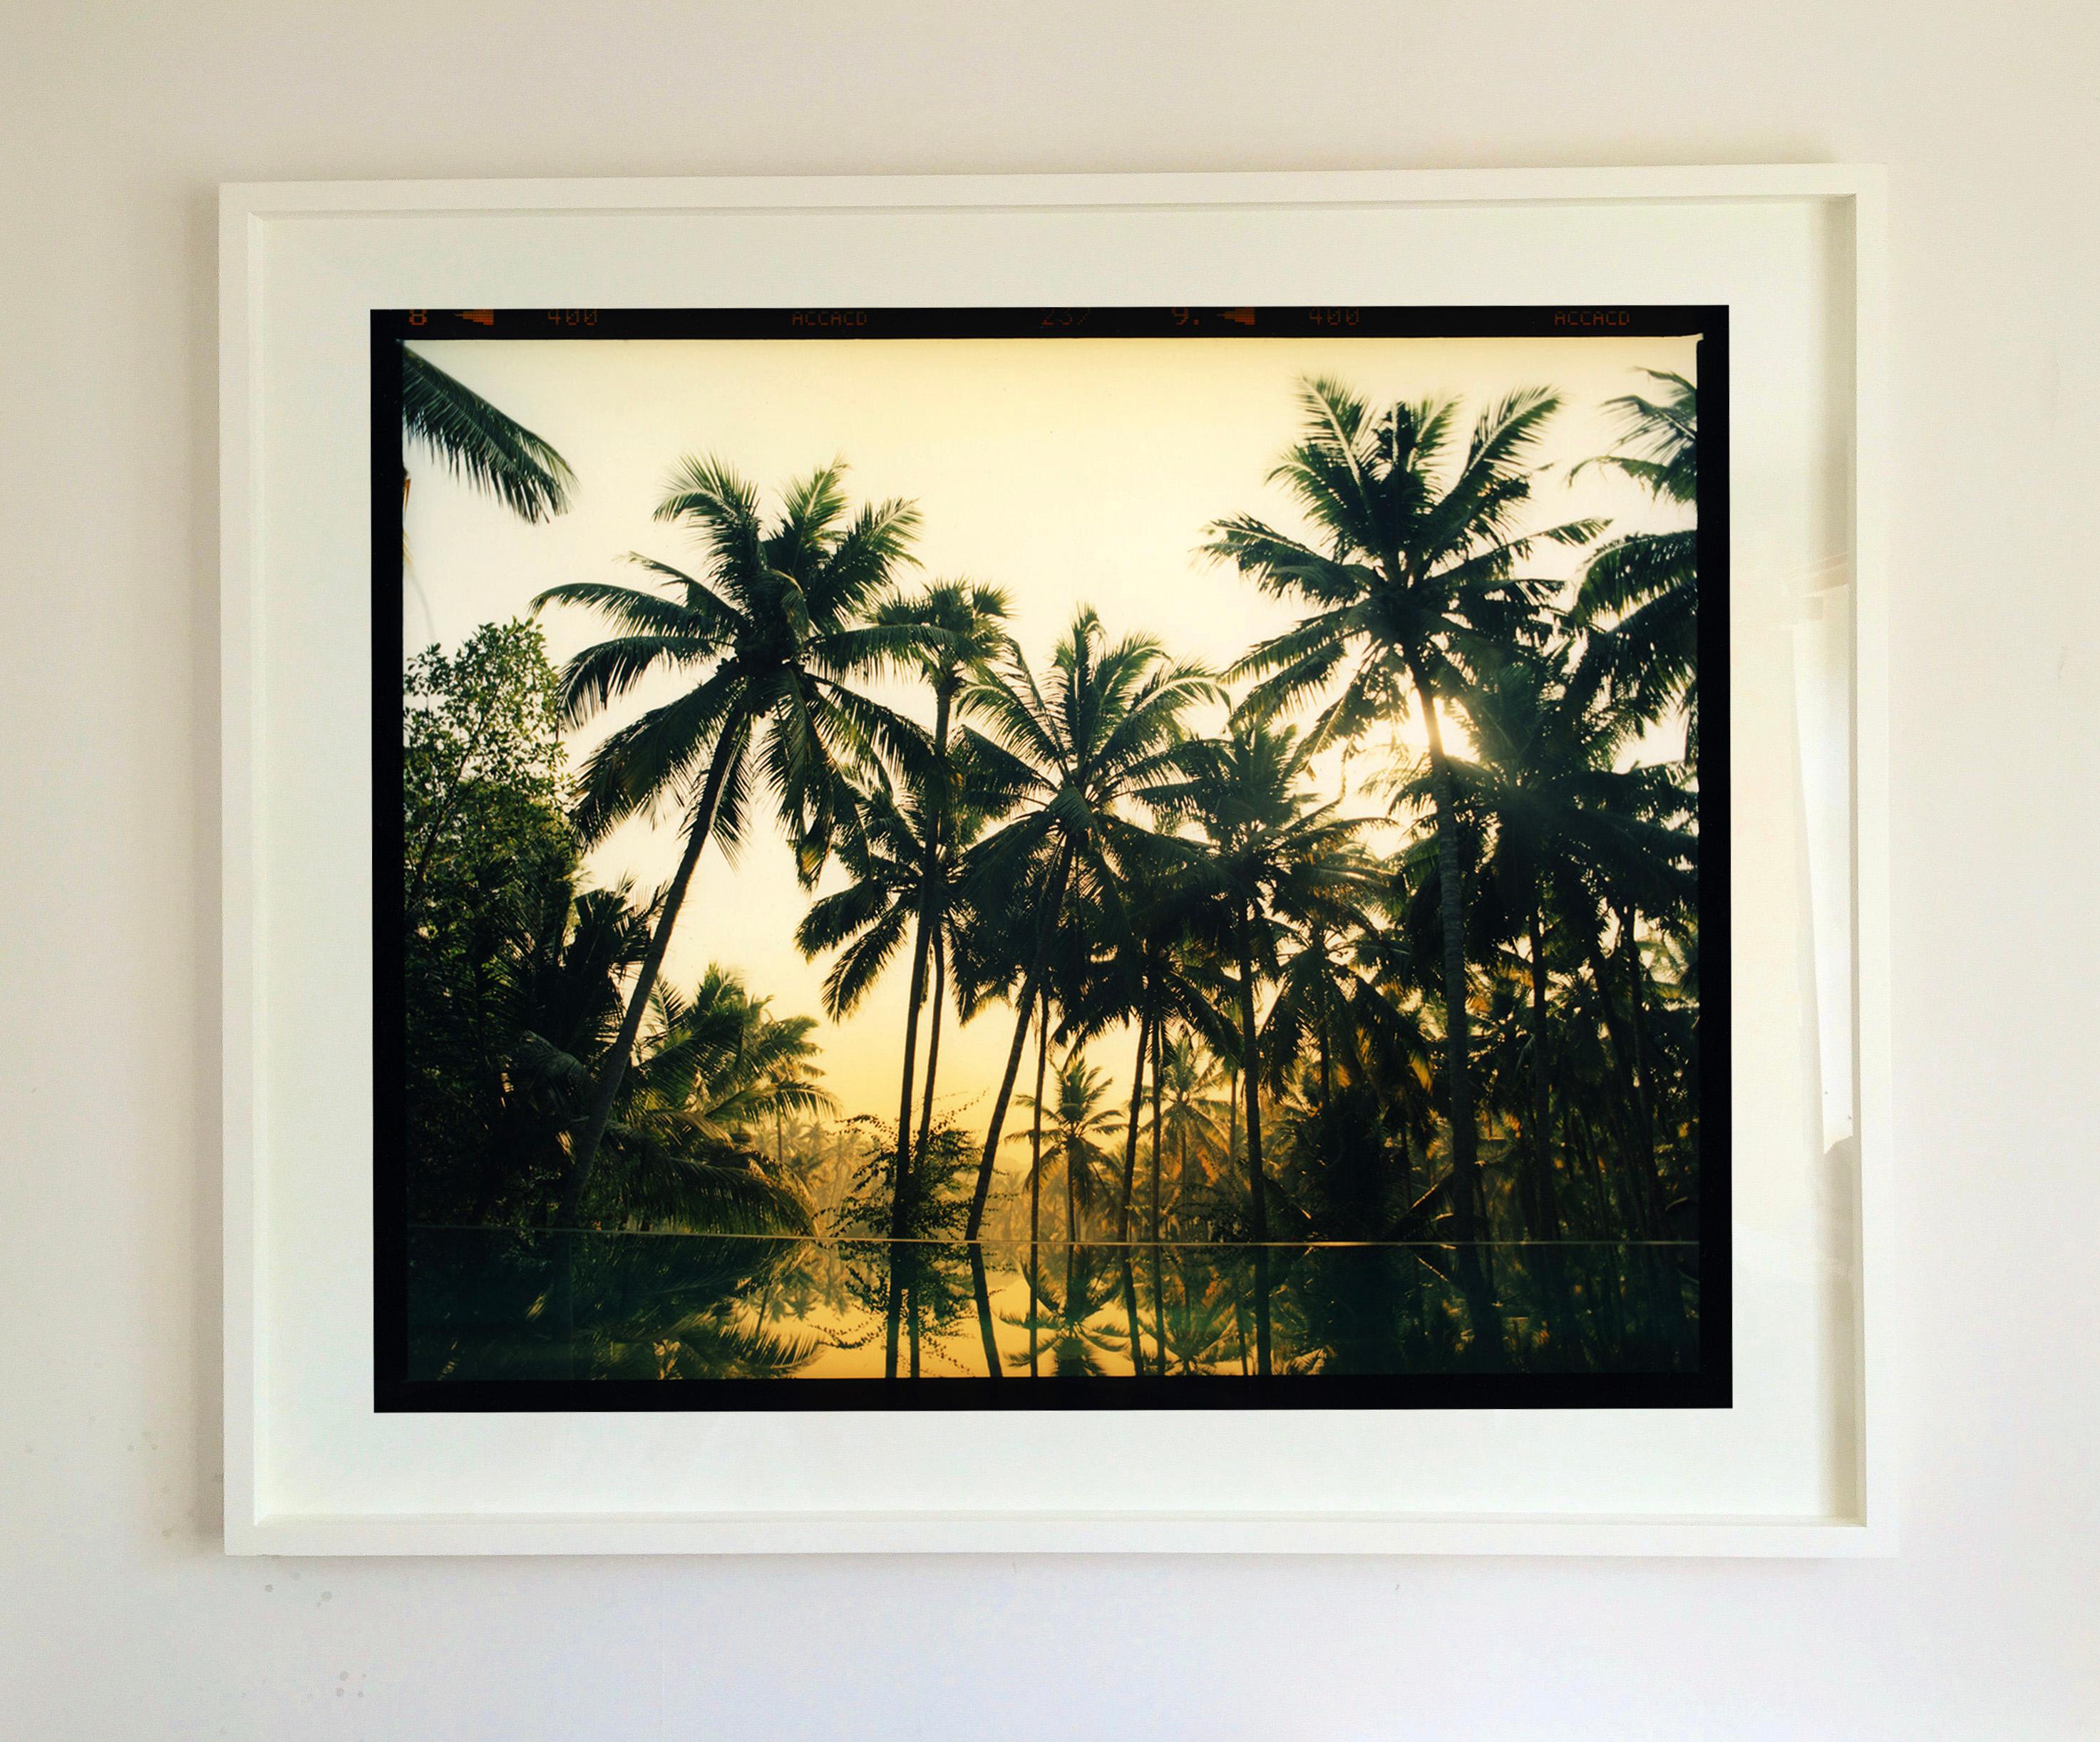 Photographed on Richard's journey in India, a pilgrimage from Kerala in the South, to his Grandfather's birthplace Meerut in the North. Shot in Kerala in 2013 this gorgeous palm tree lagoon warms a room, taking you somewhere tropical. Richard is